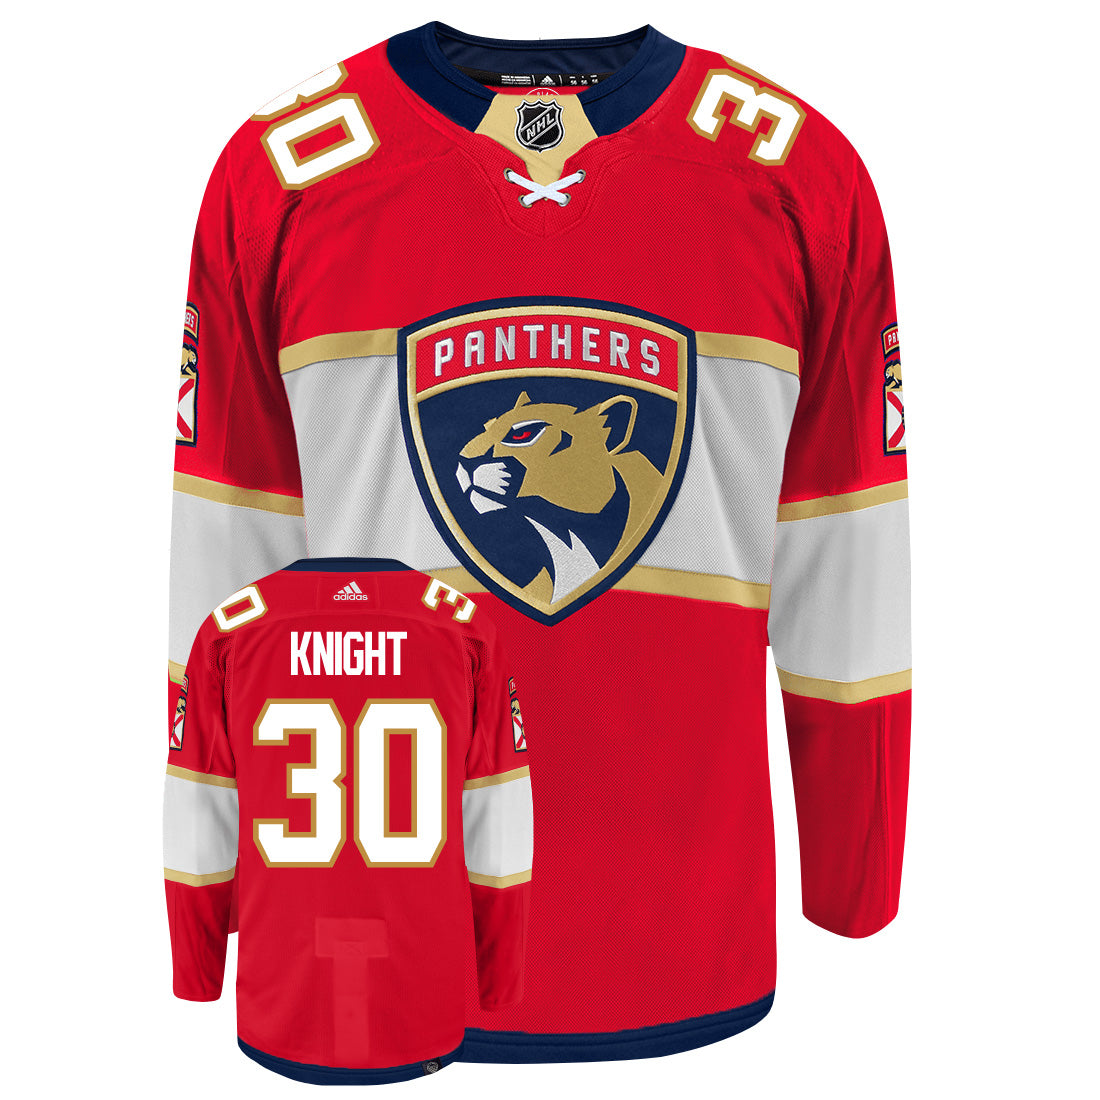 Florida Panthers Adidas St. Patrick's Day Authentic Jersey 50 (M)